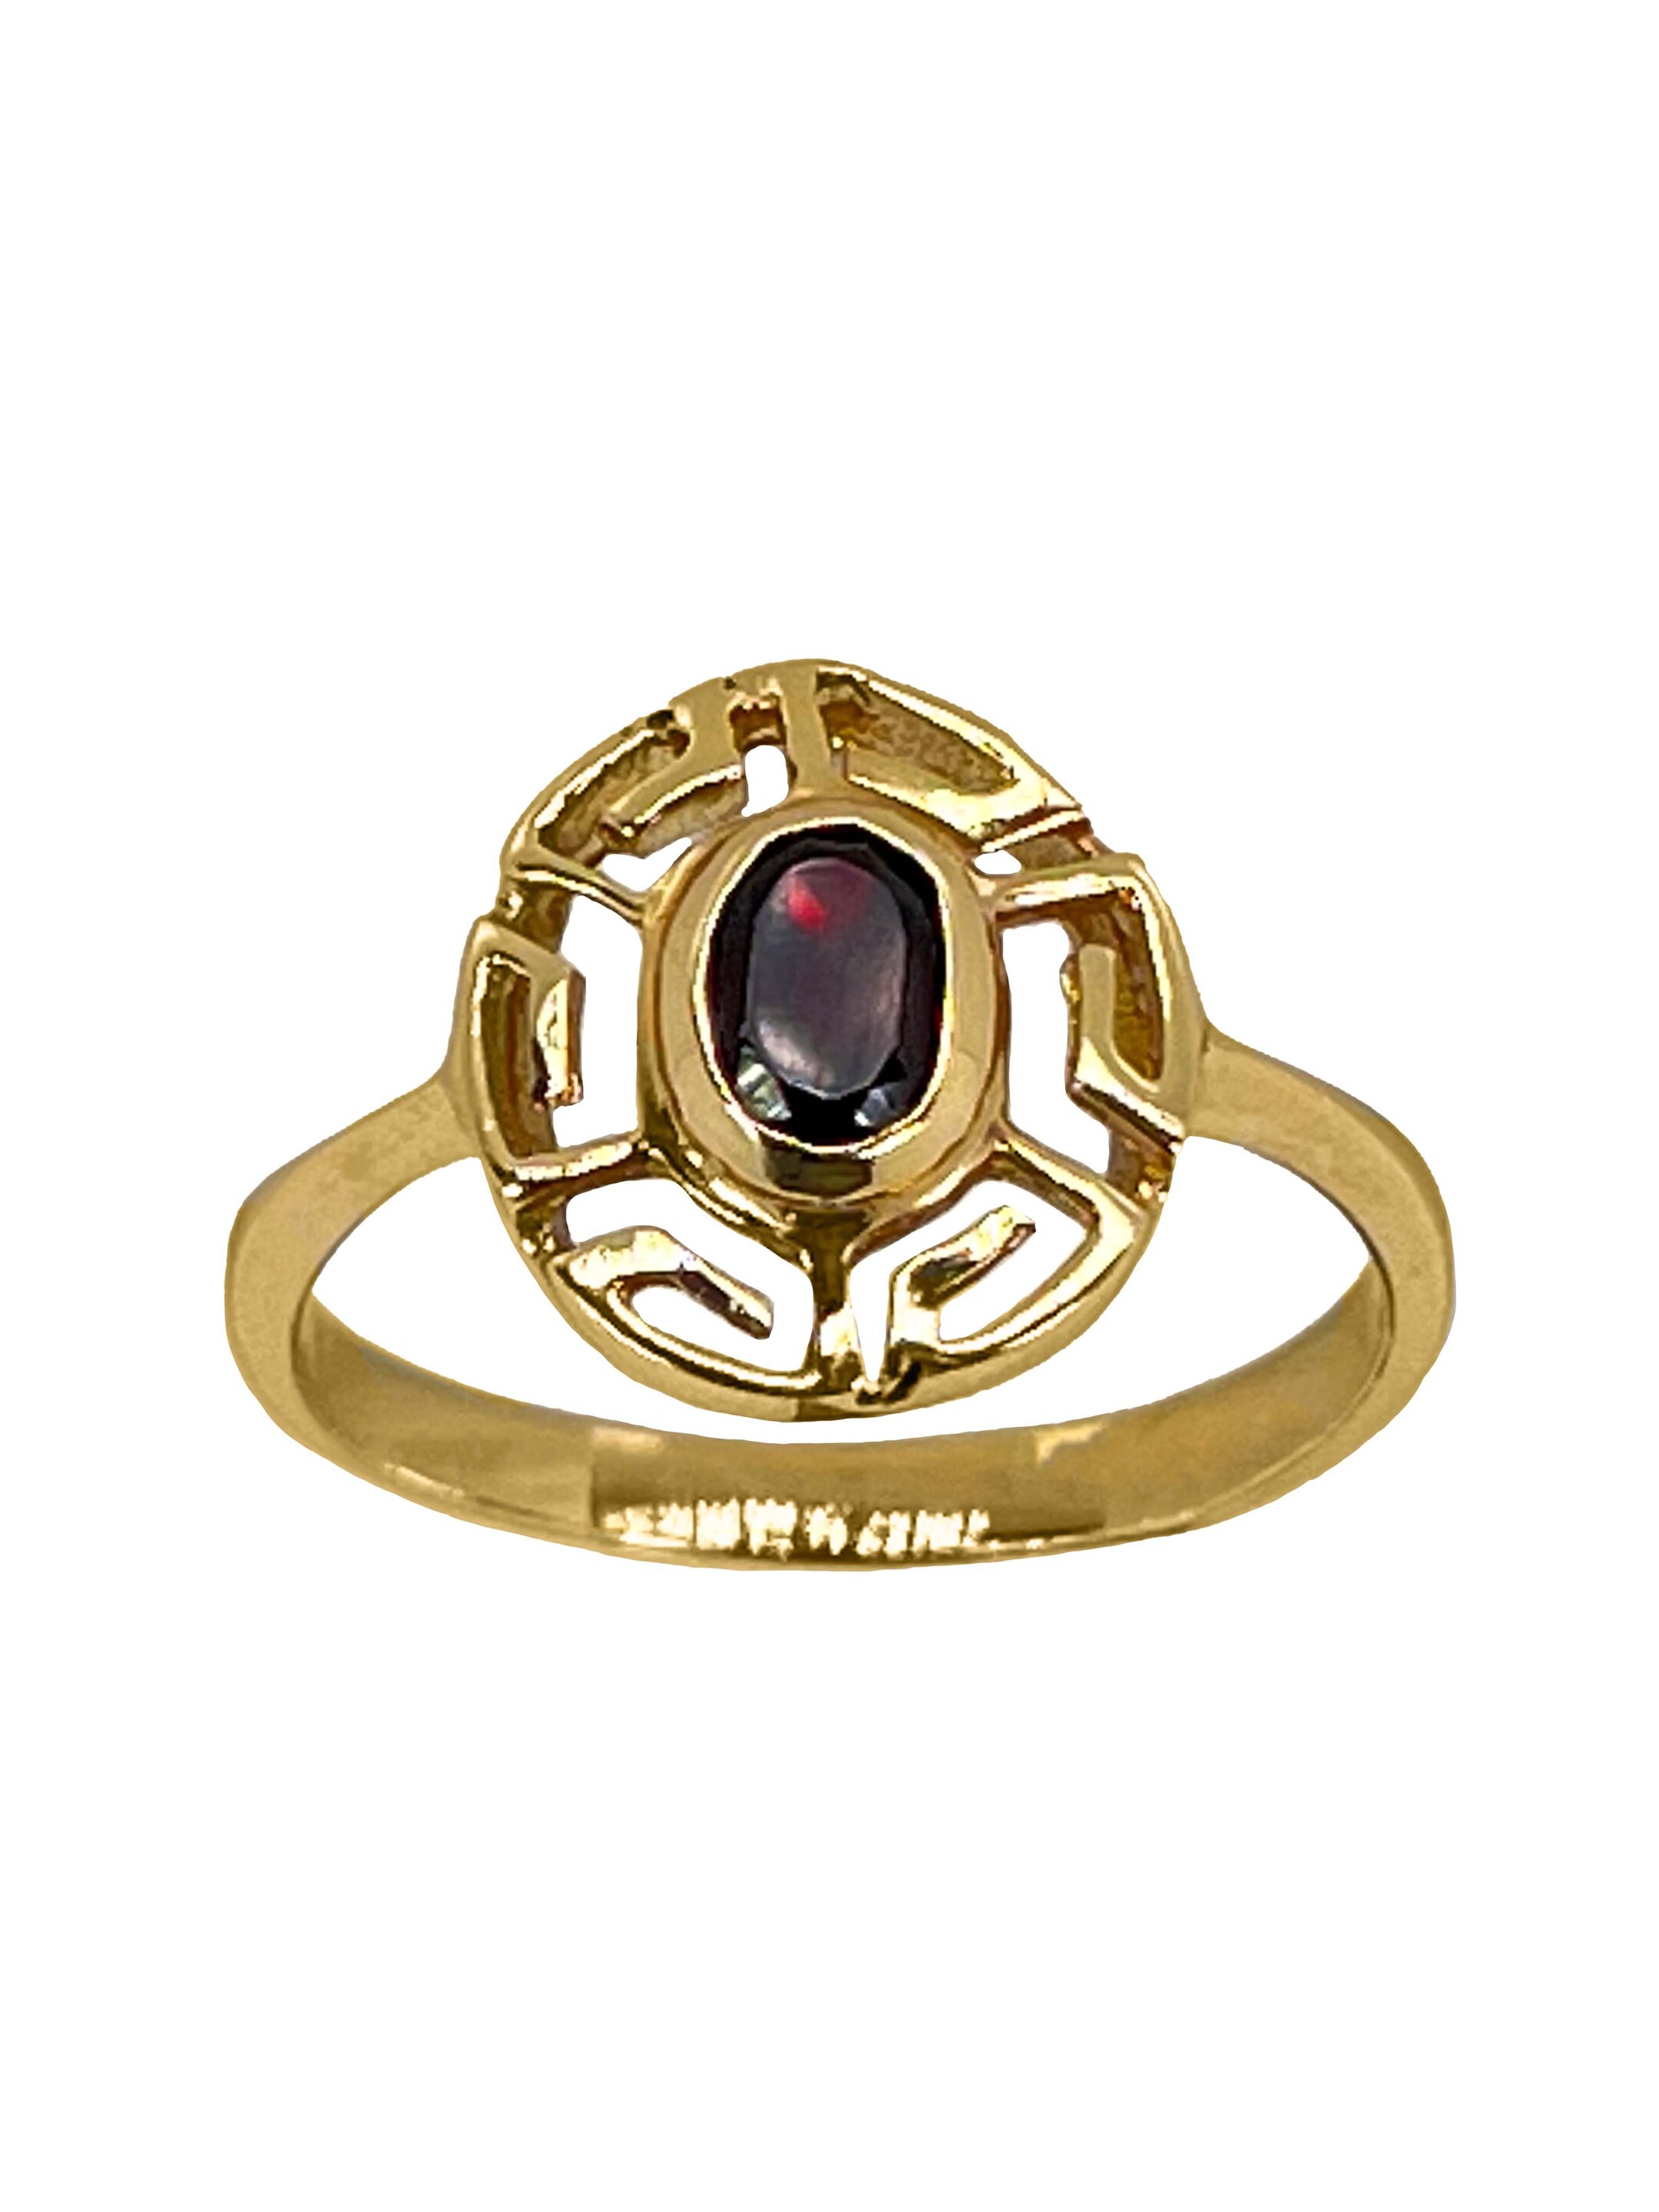 Shiny gold ring with red zircon